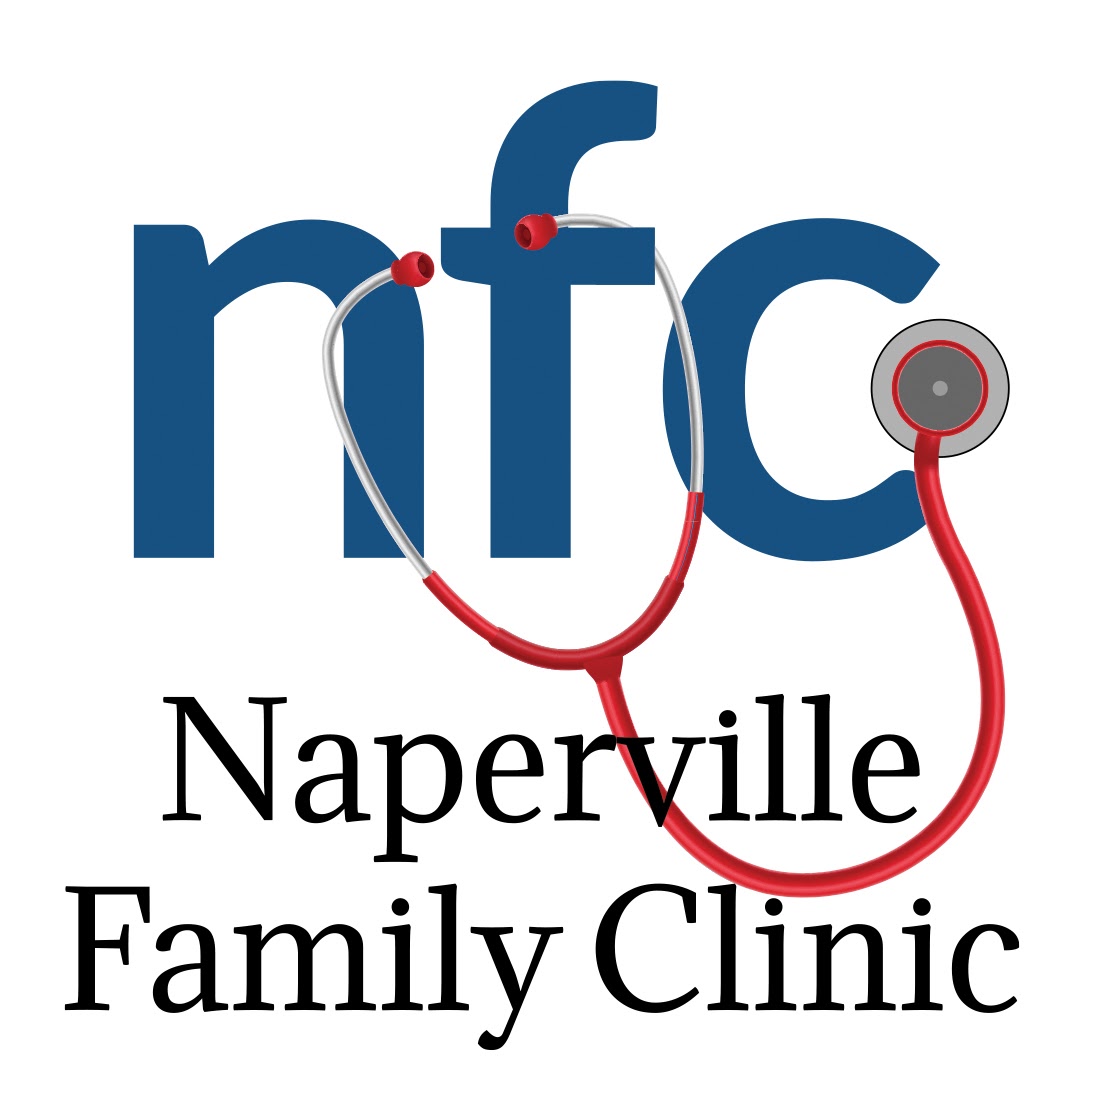 Naperville Family Clinic